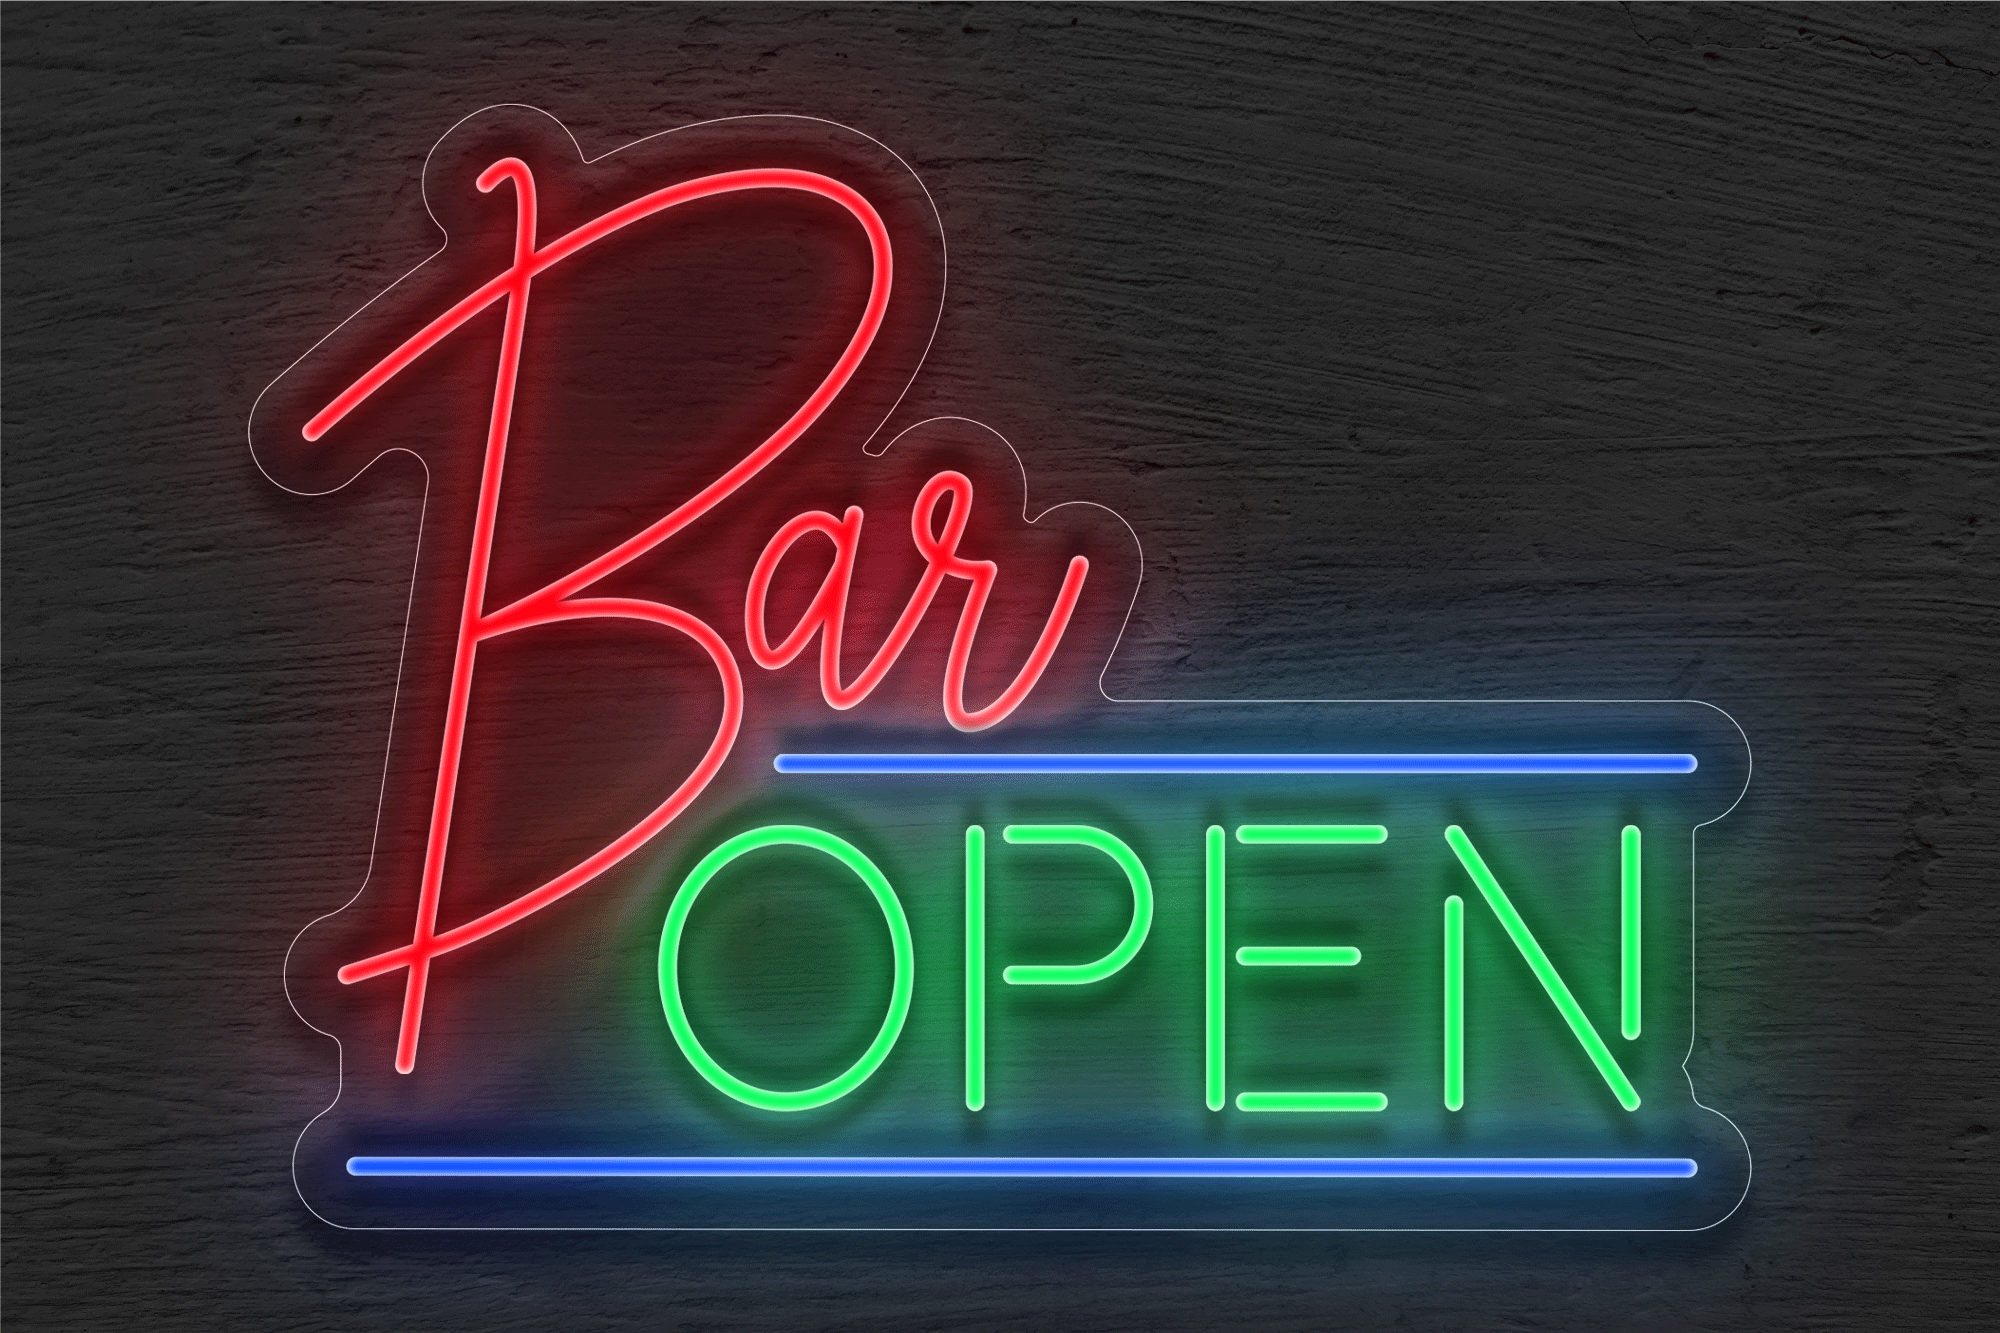 Multi-color "Bar OPEN" with Two Lines LED Neon Sign